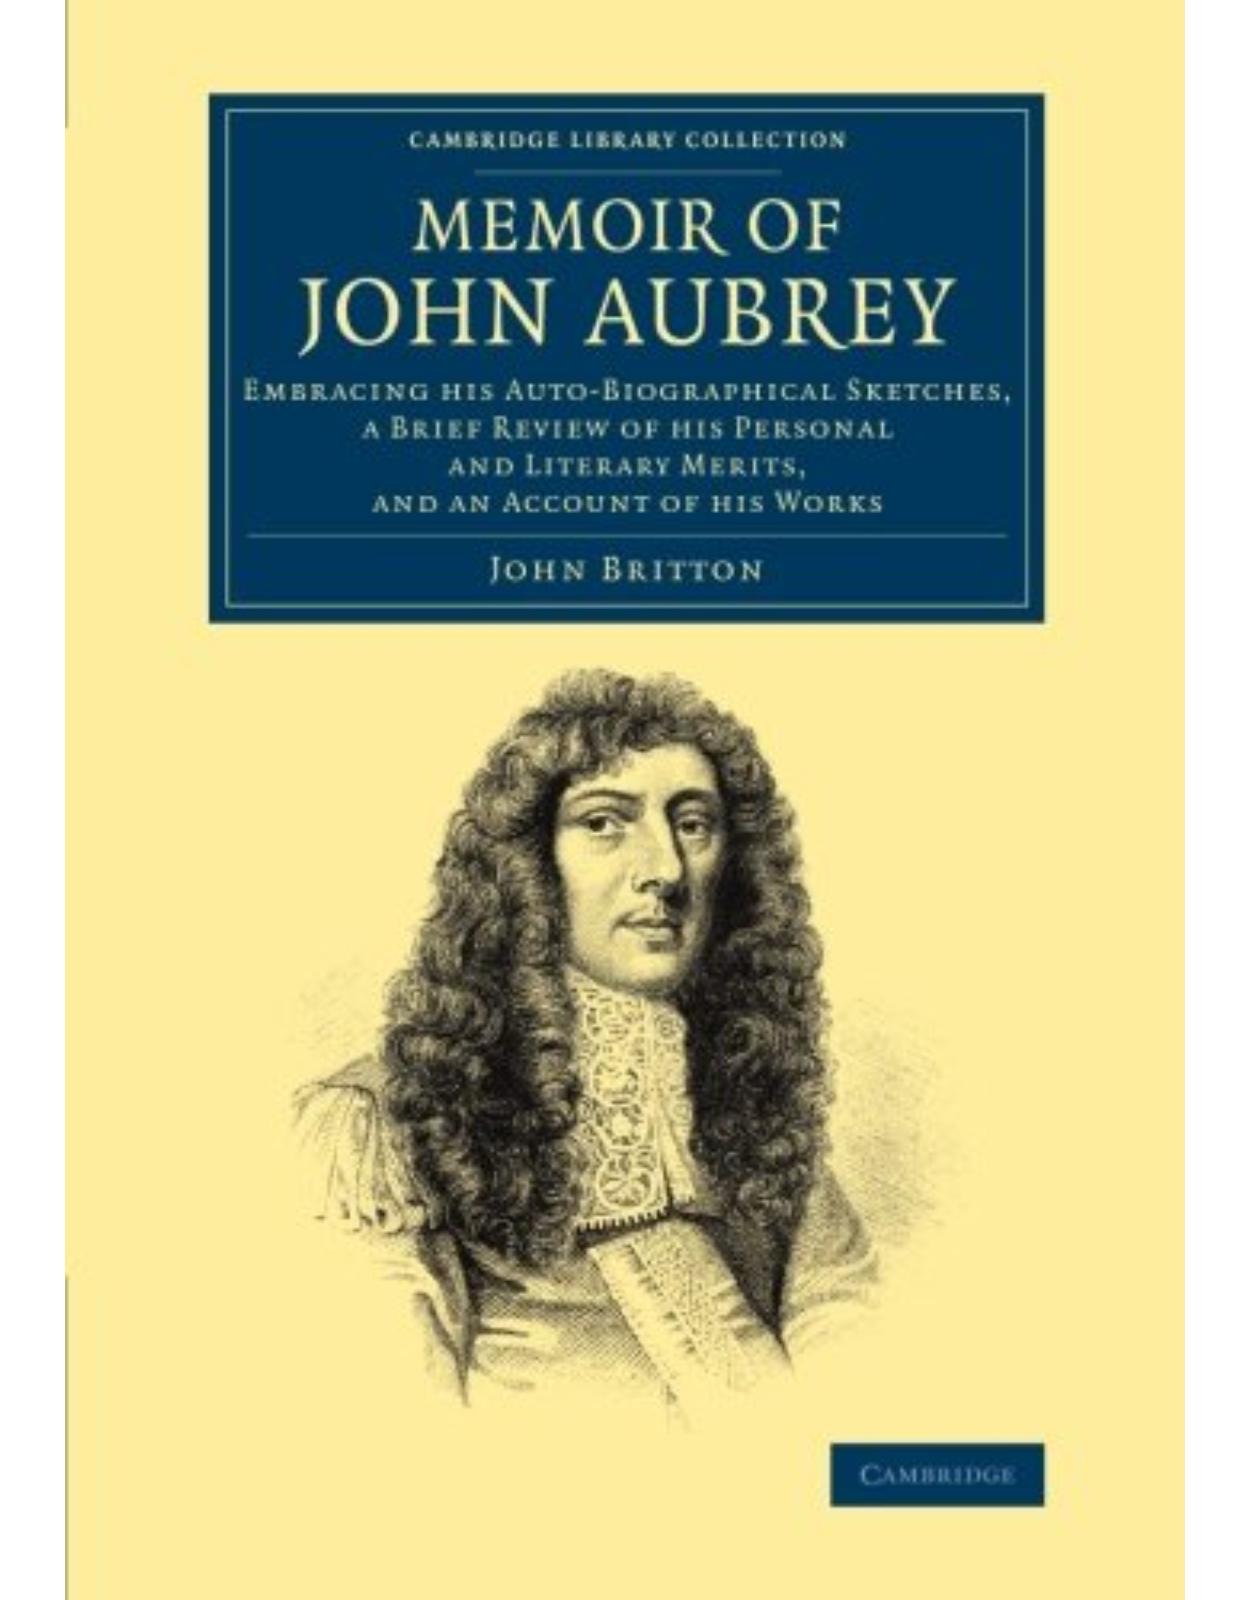 Memoir of John Aubrey: Embracing his Auto-Biographical Sketches, a Brief Review of his Personal and Literary Merits, and an Account of his Works ... & Irish History, 17th & 18th Centuries)